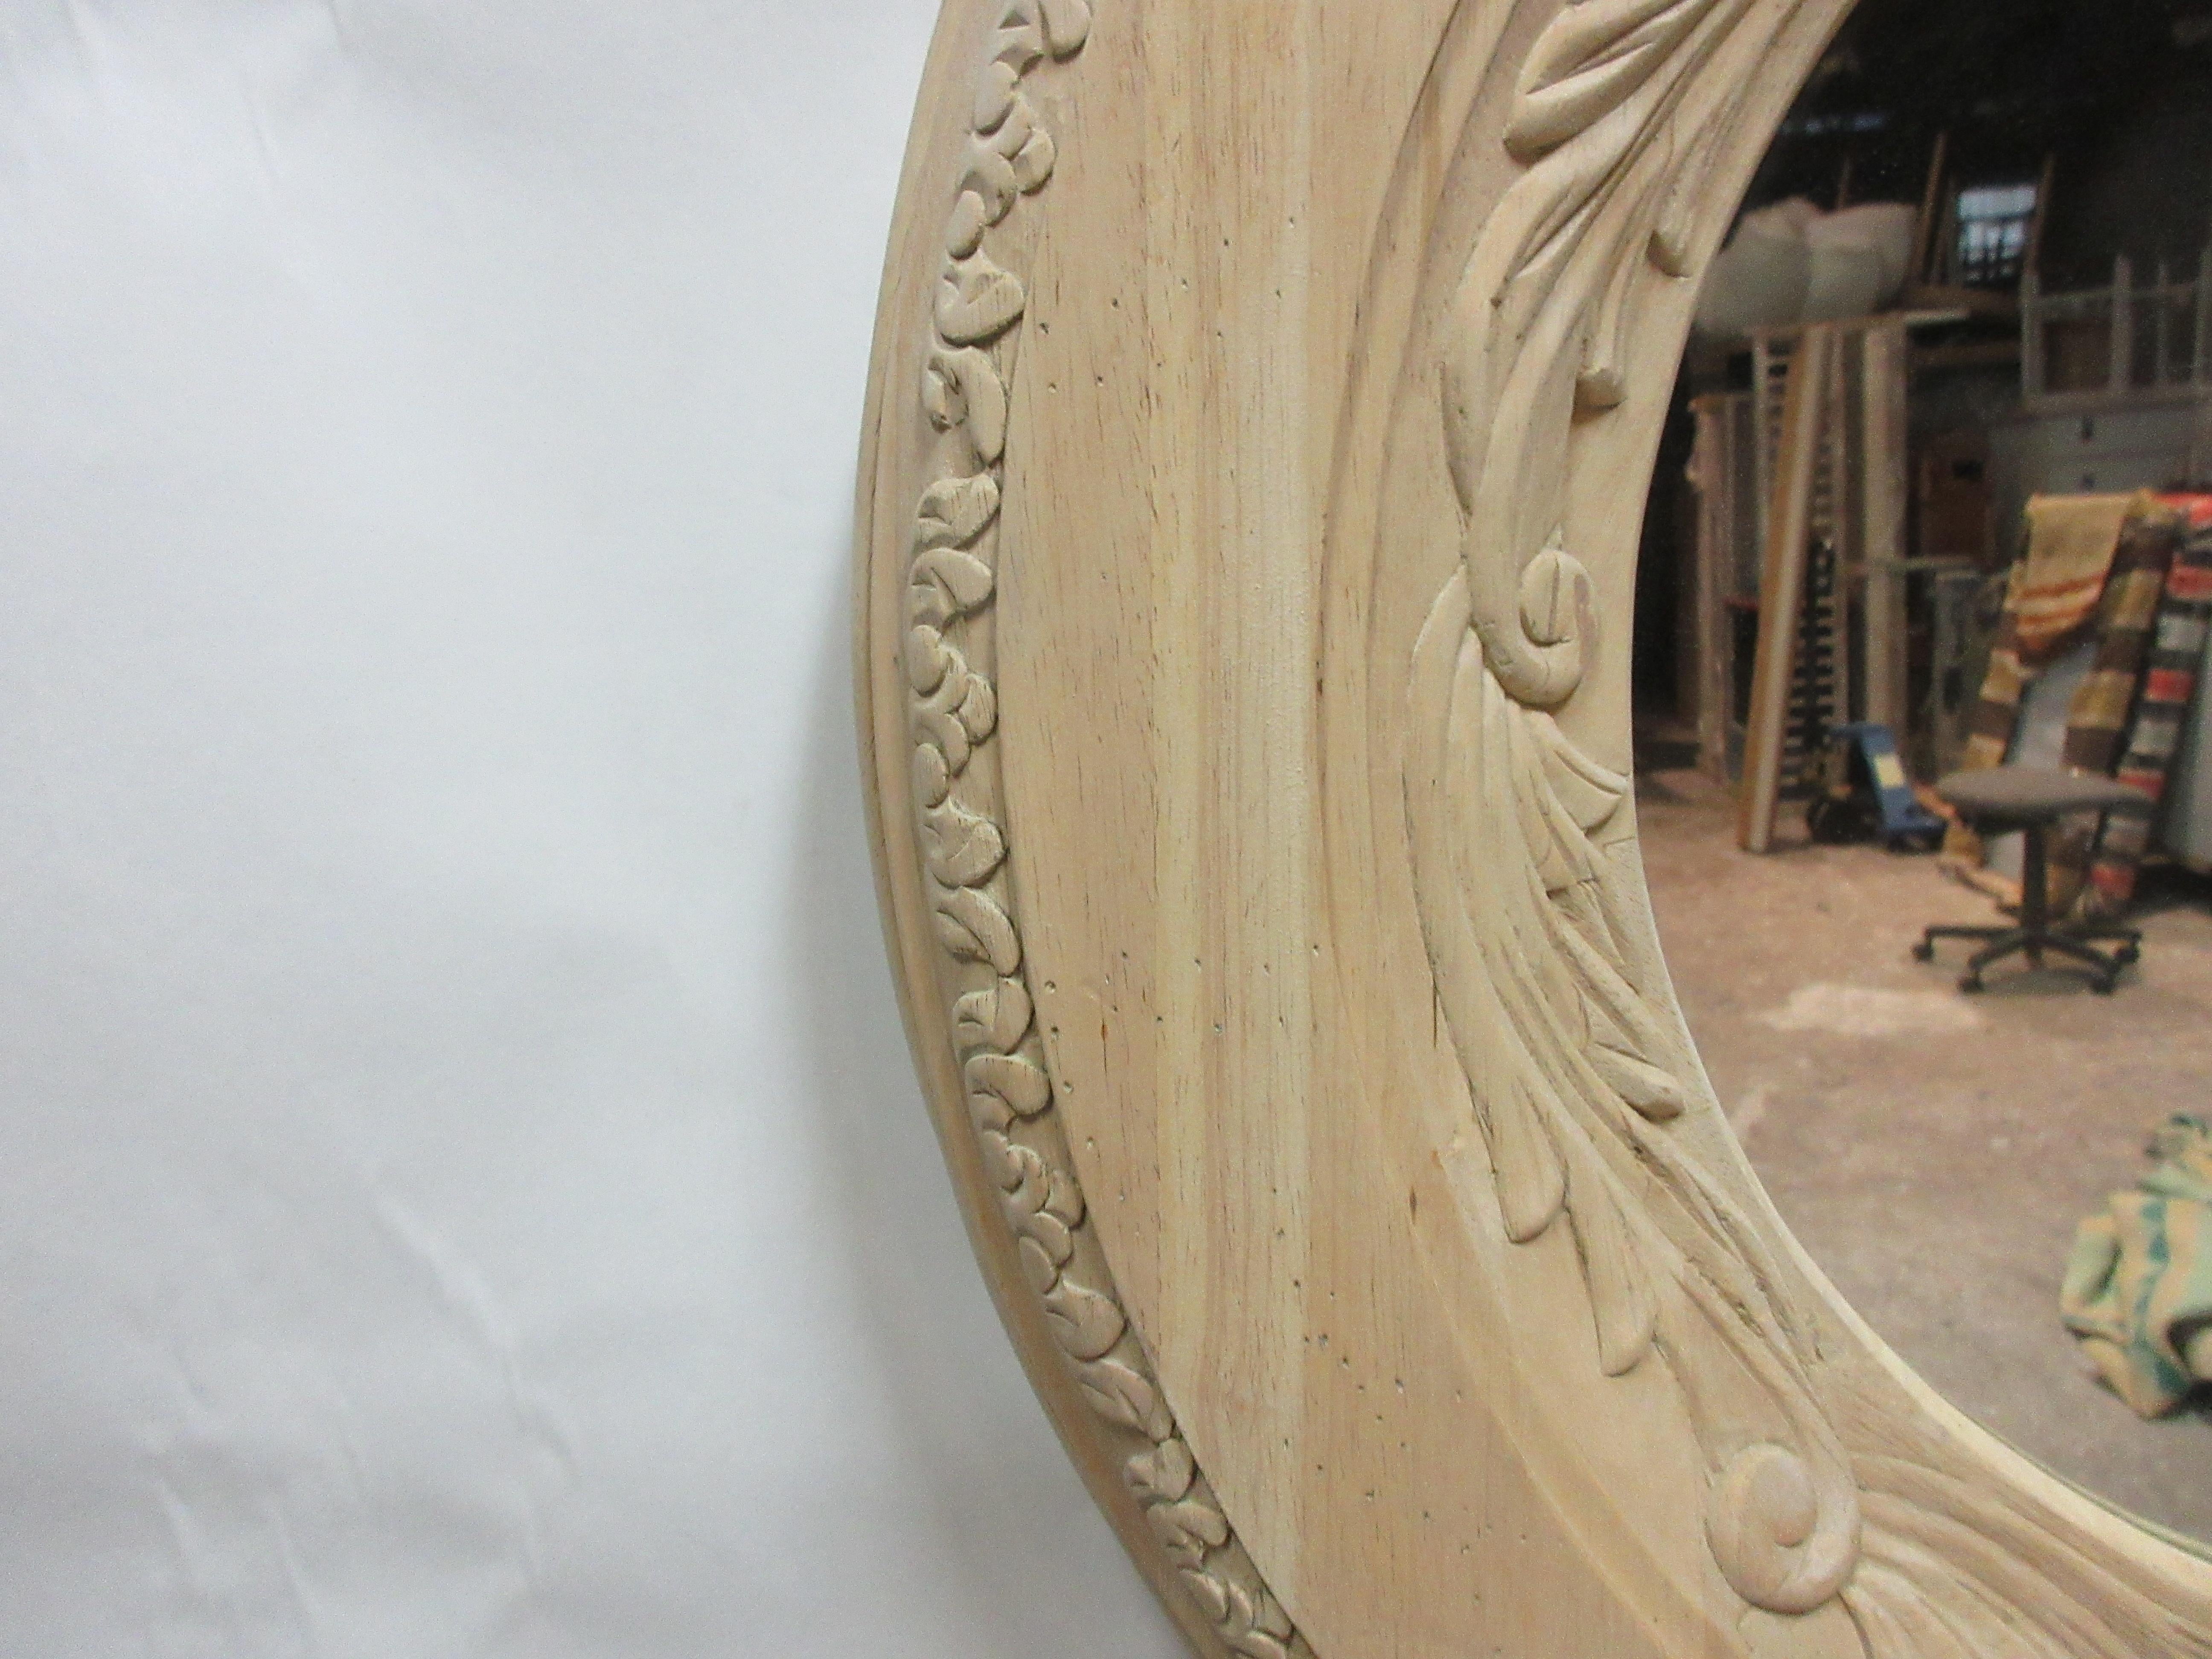 This is an unusual round hand carved wall mirror. I purchased it with a Dark Brown wood stain and decided it would look much better stripped to raw wood.